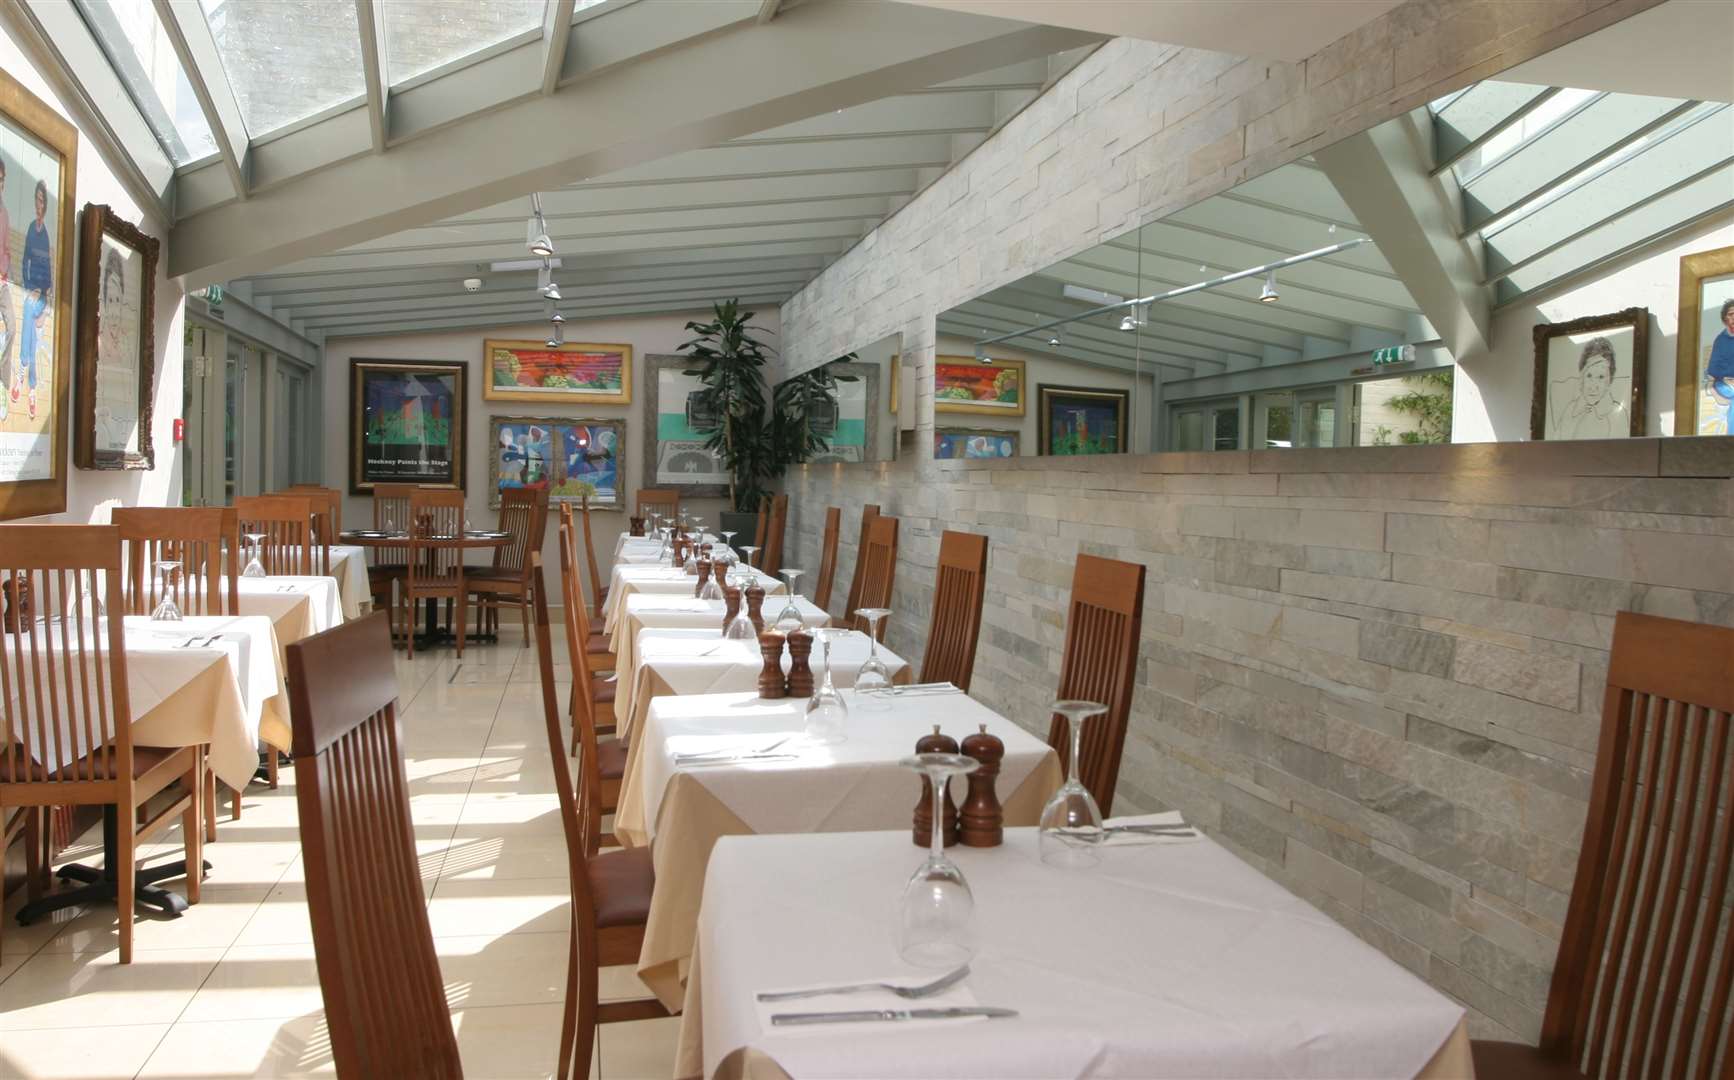 Inside the restaurant when it was open and won restaurant of the year. Picture: John Westhrop